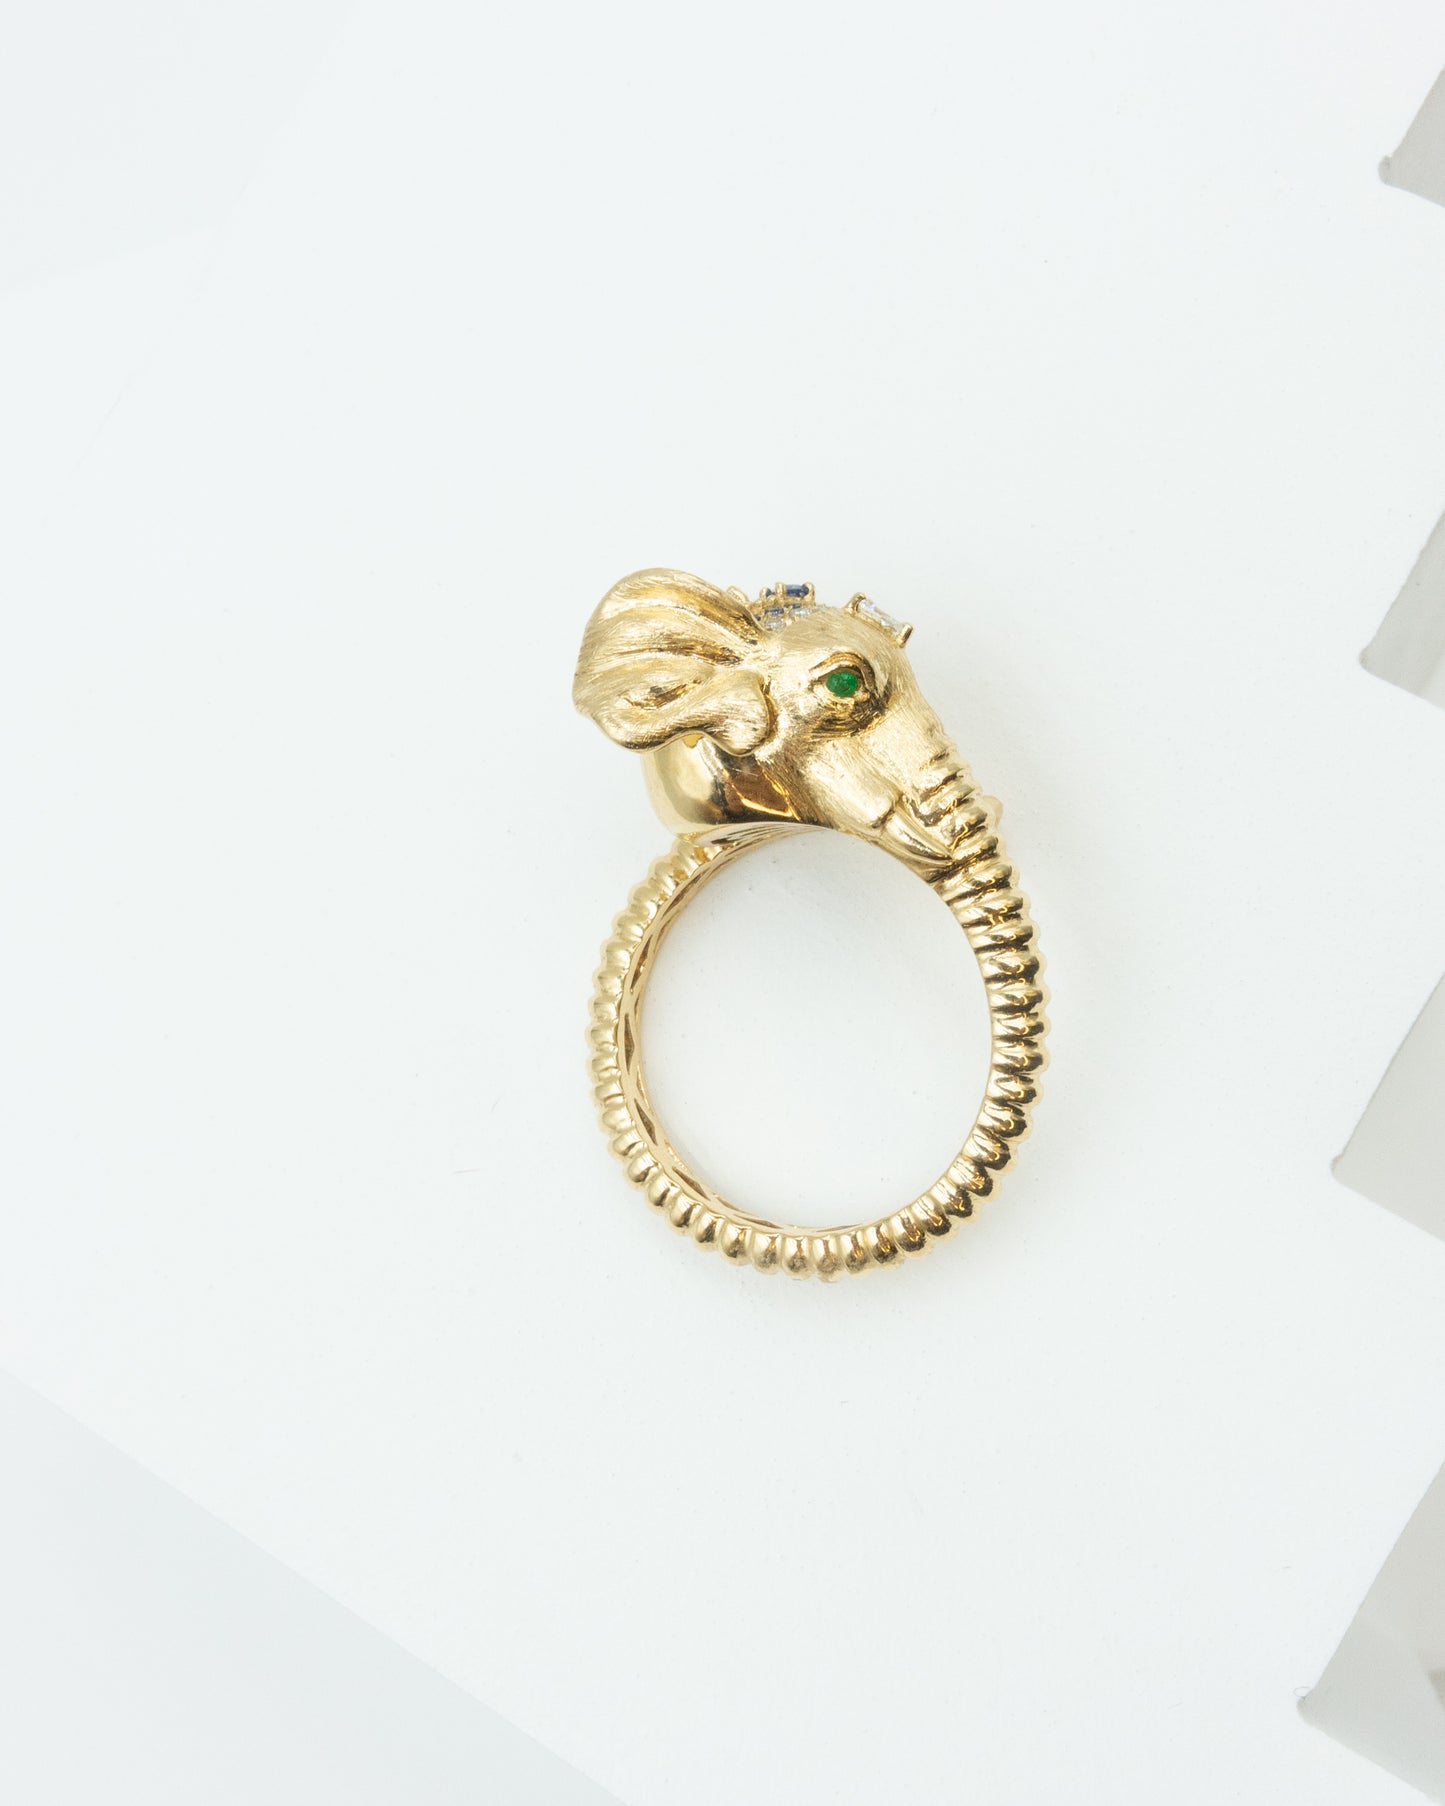 The Elephant Statement Ring